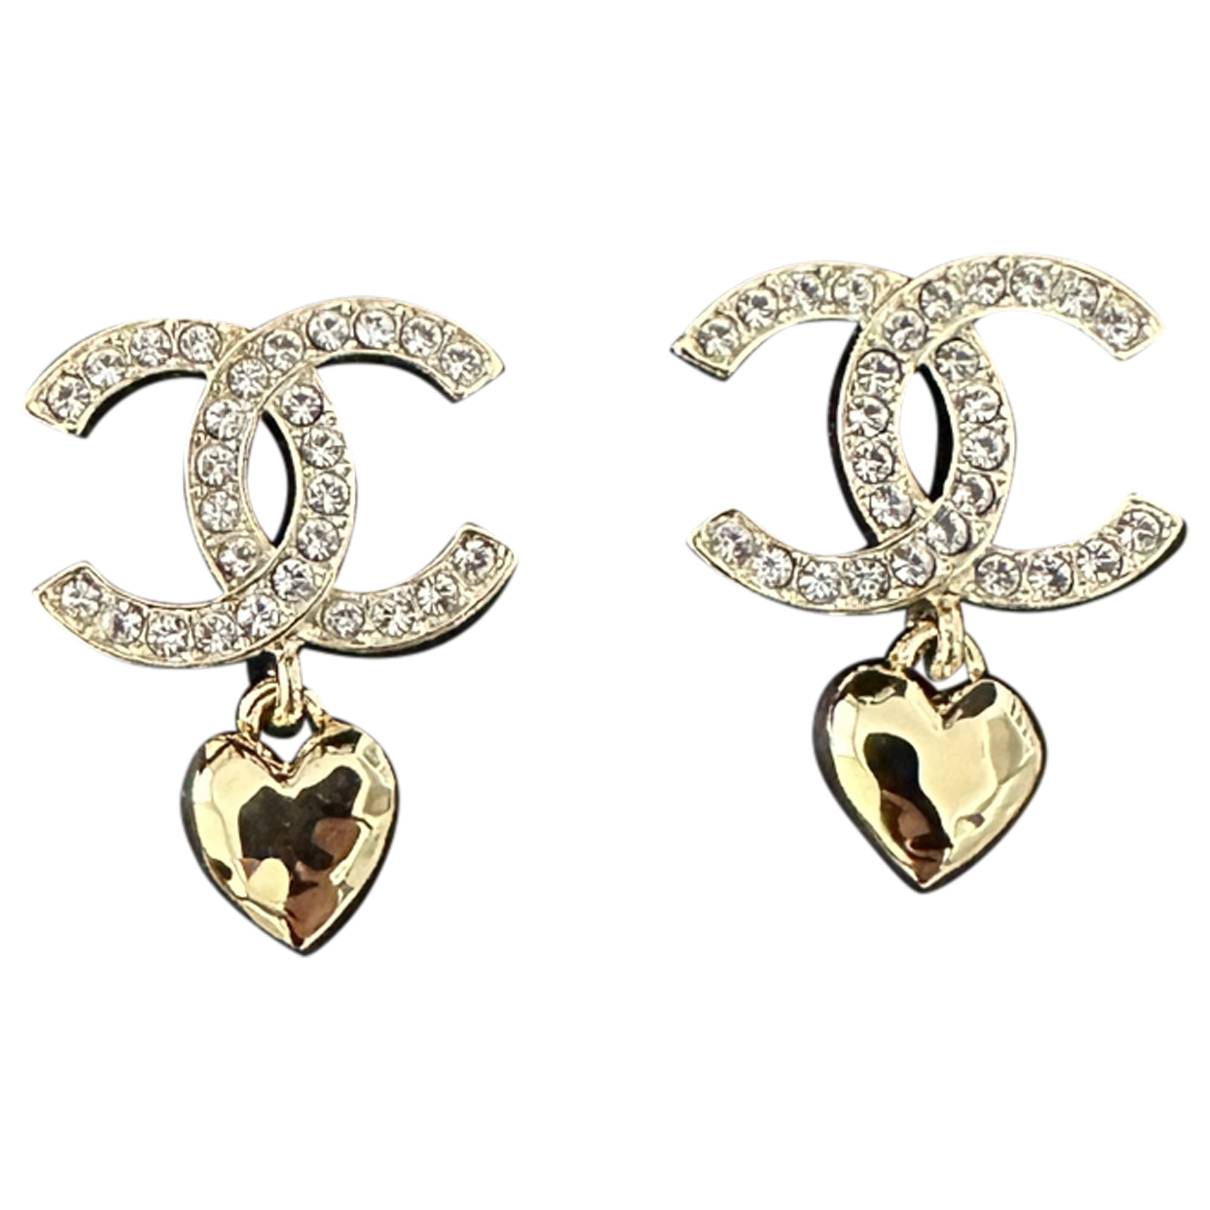 Cc crystal earrings Chanel Gold in Crystal - 35551569